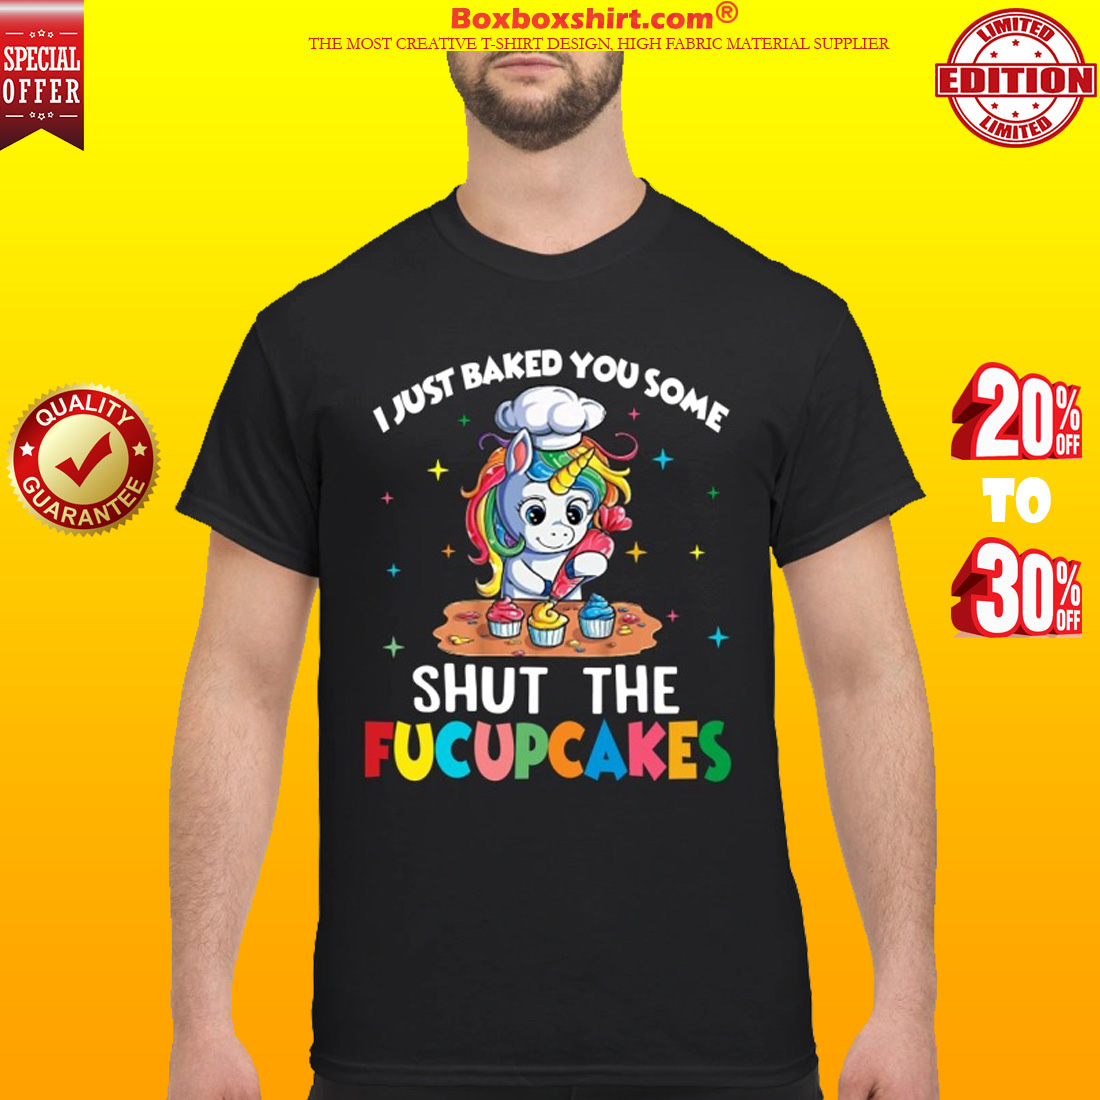 I just baked you some shut the fucupcakes classic shirt